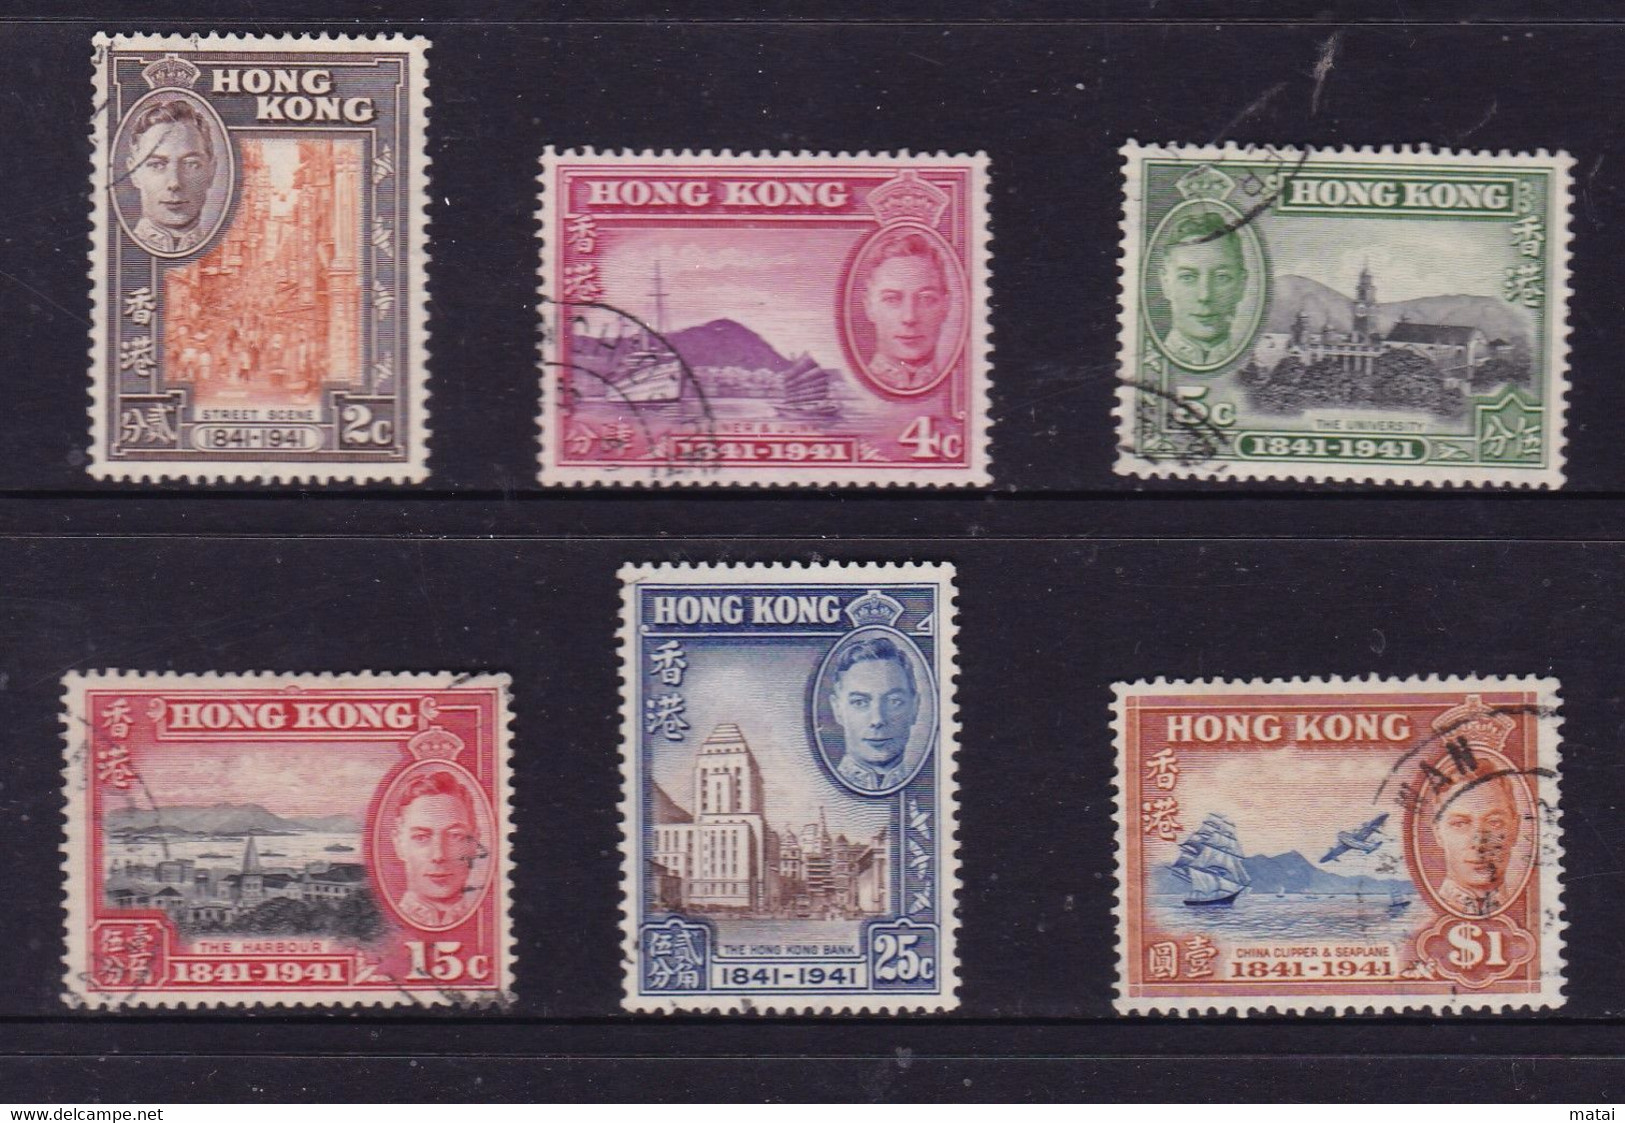 HONG KONG 1941, "Centenary Of British Occupation", Serie Cancelled, Very Light Trace Of Hinge - 1941-45 Ocupacion Japonesa